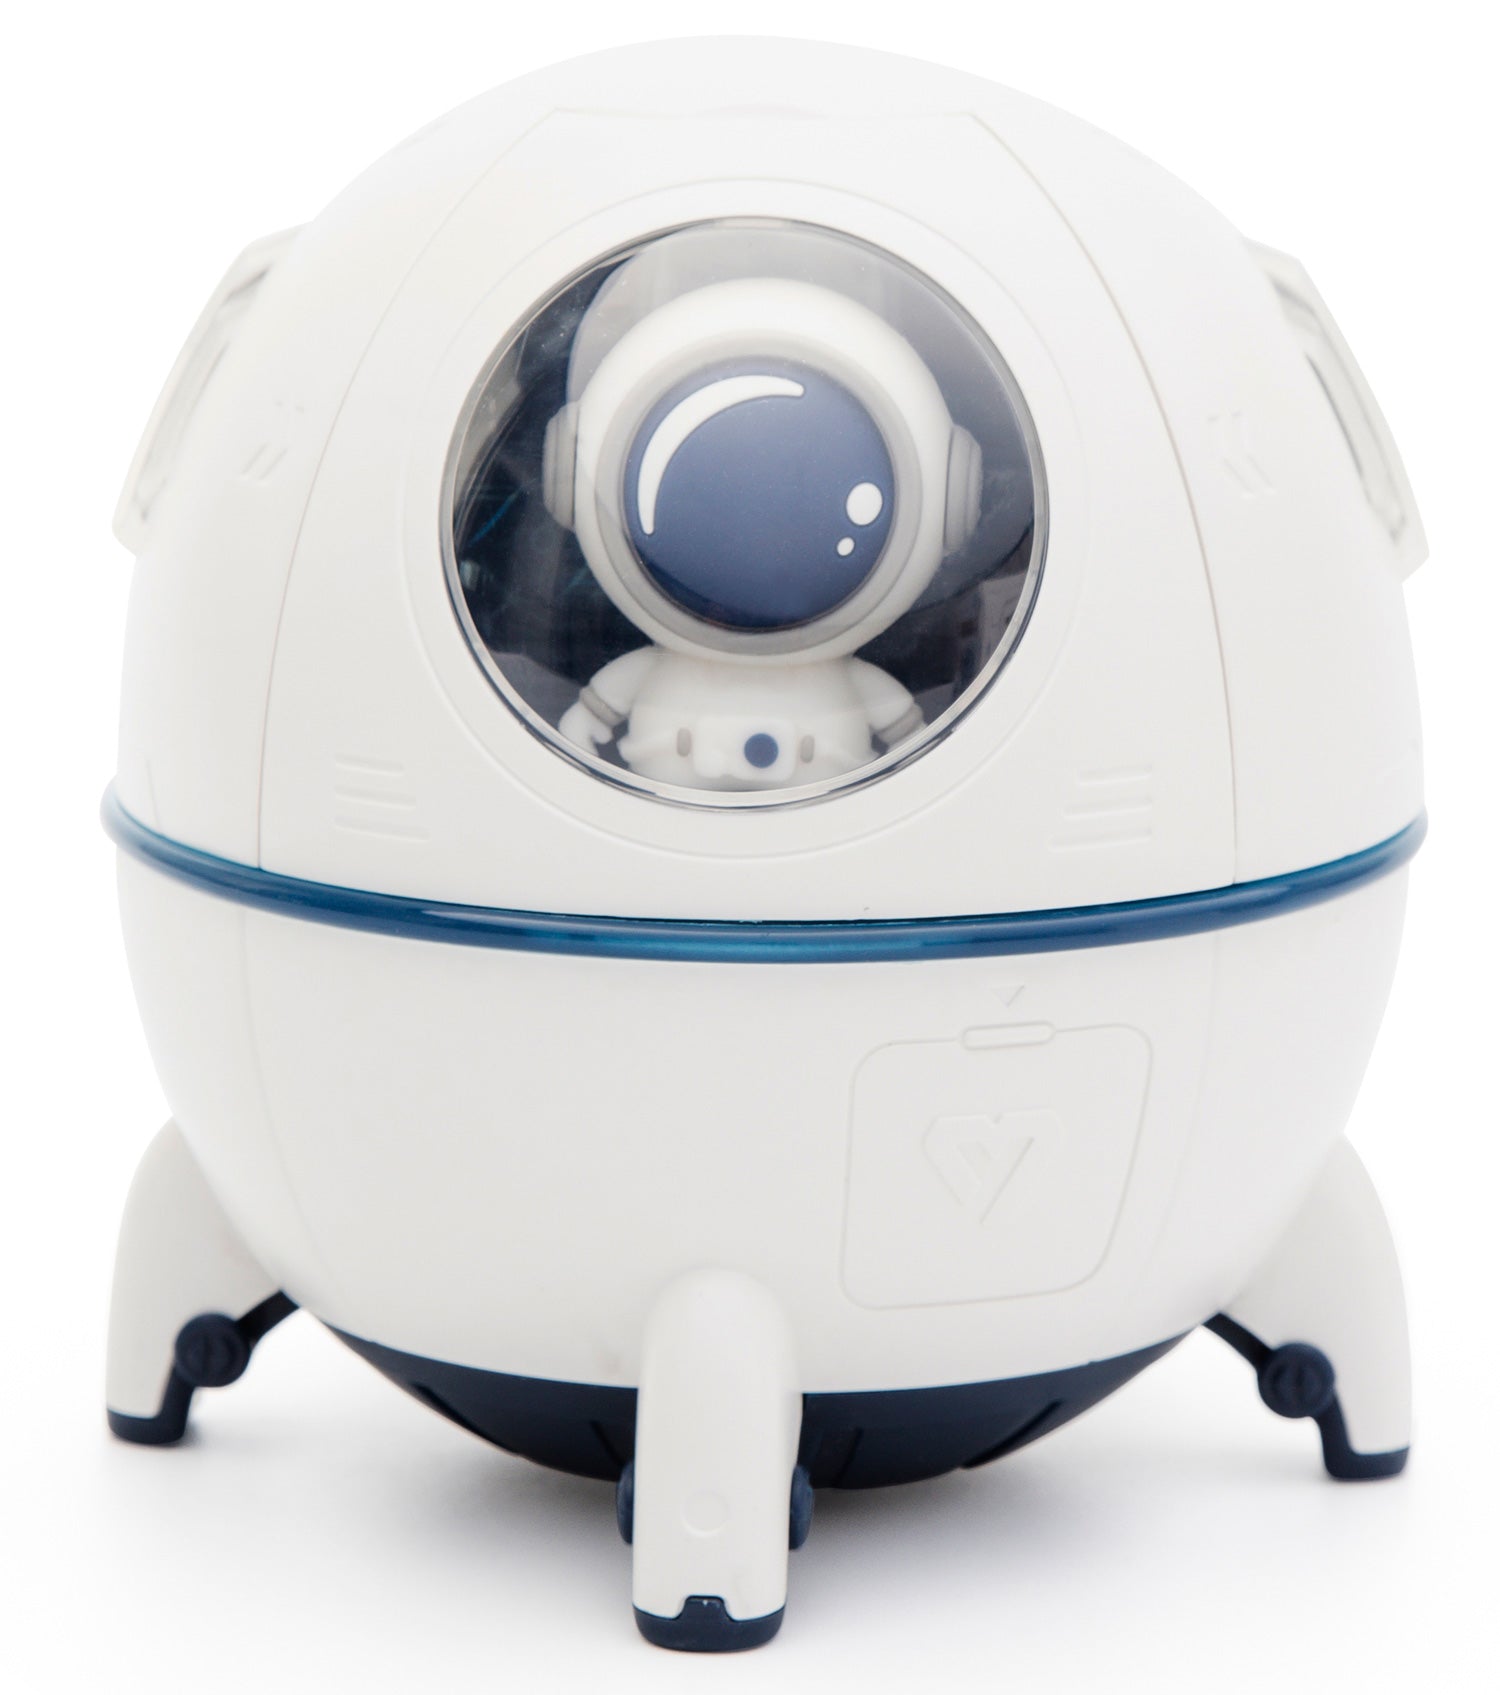 Spaceship Explorer Childrens Essential Oil Diffuser, Humidifier and Night Light